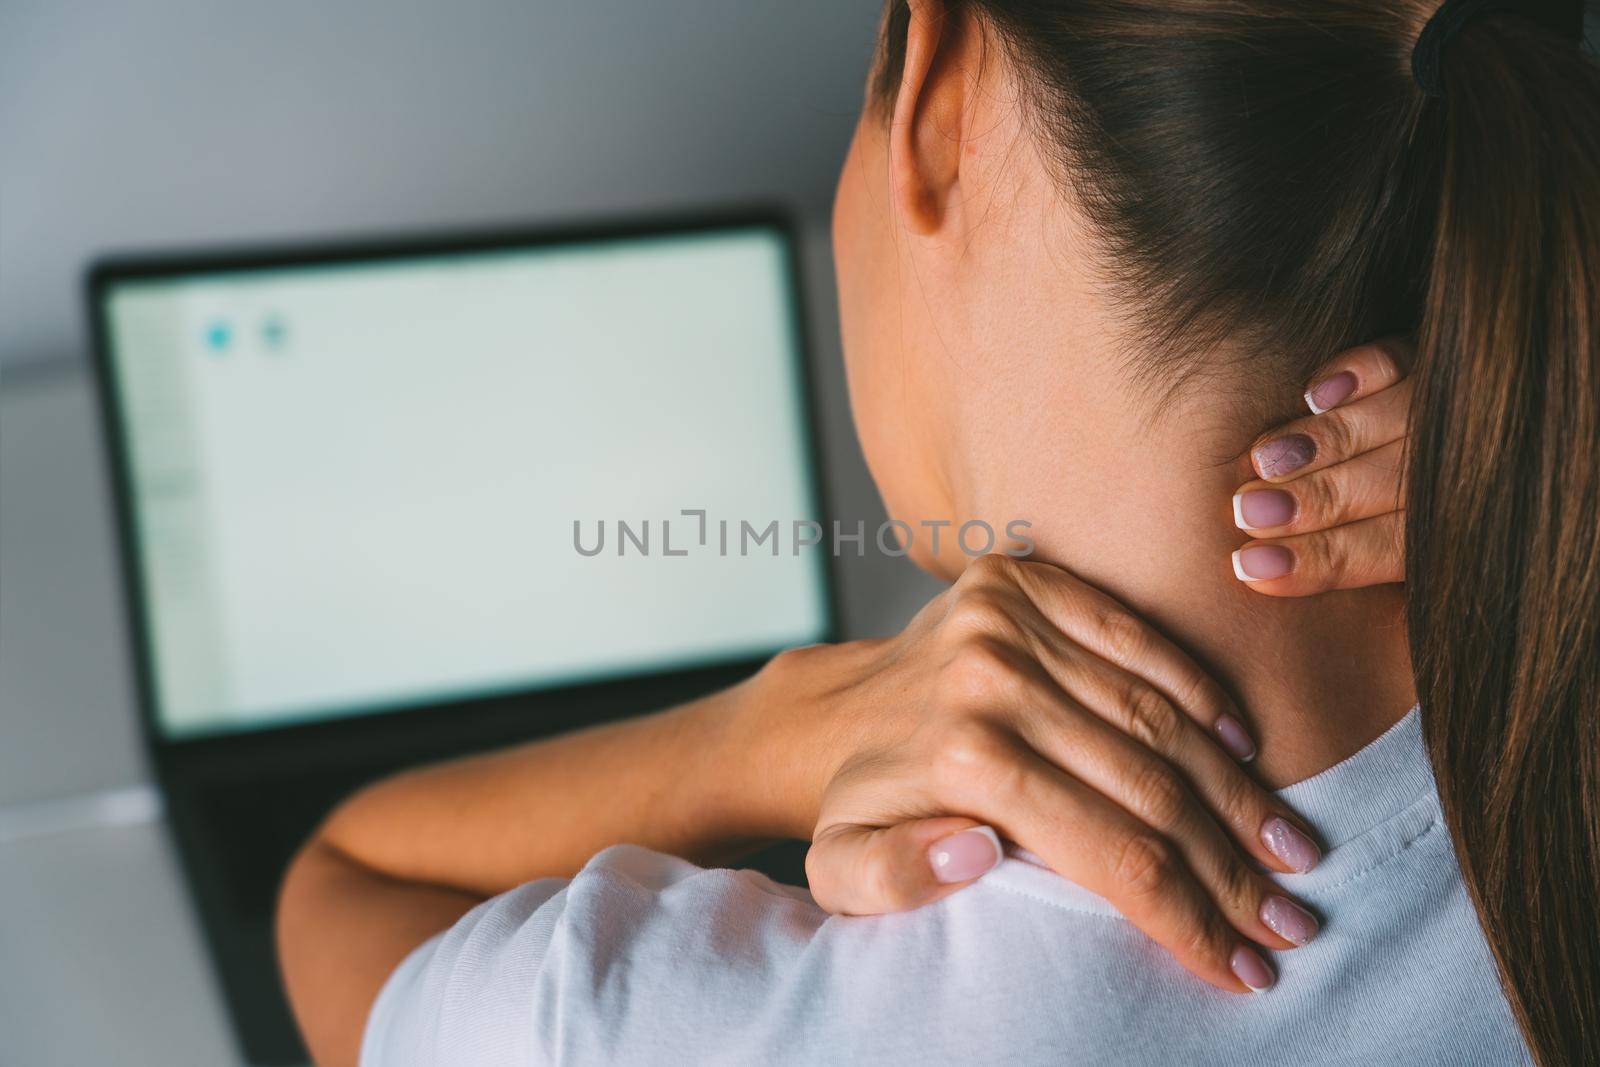 Neck pain after working on laptop or computer. Young woman massaging neck to relieve pain after working on pc by DariaKulkova